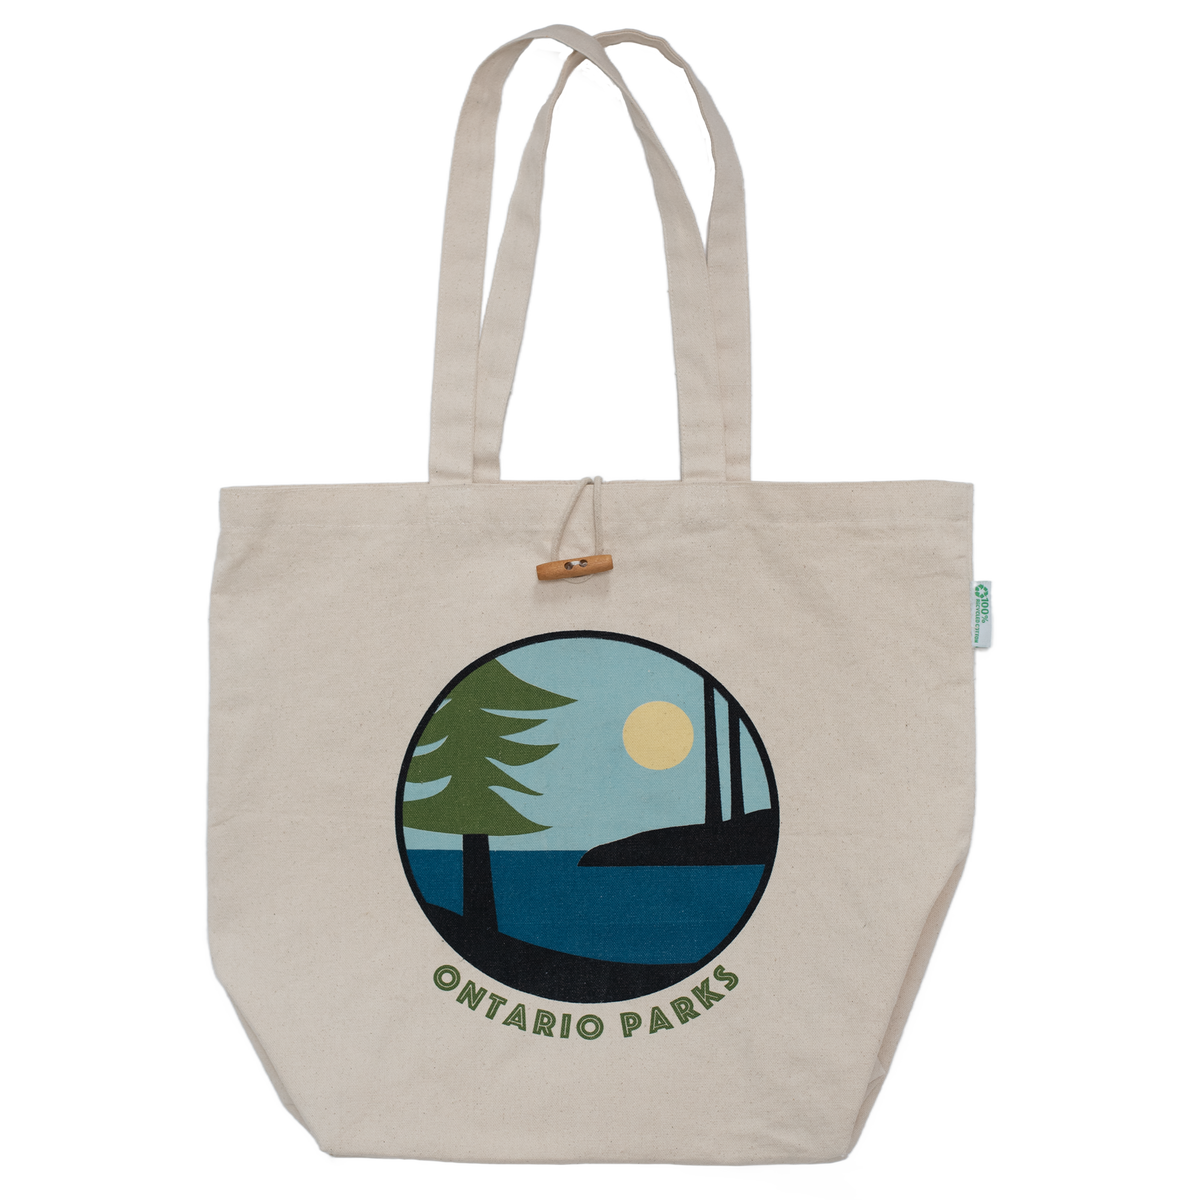 A canvas tote with a wood toggle and graphic of a tree, lake, and sun with "Ontario Parks" text.